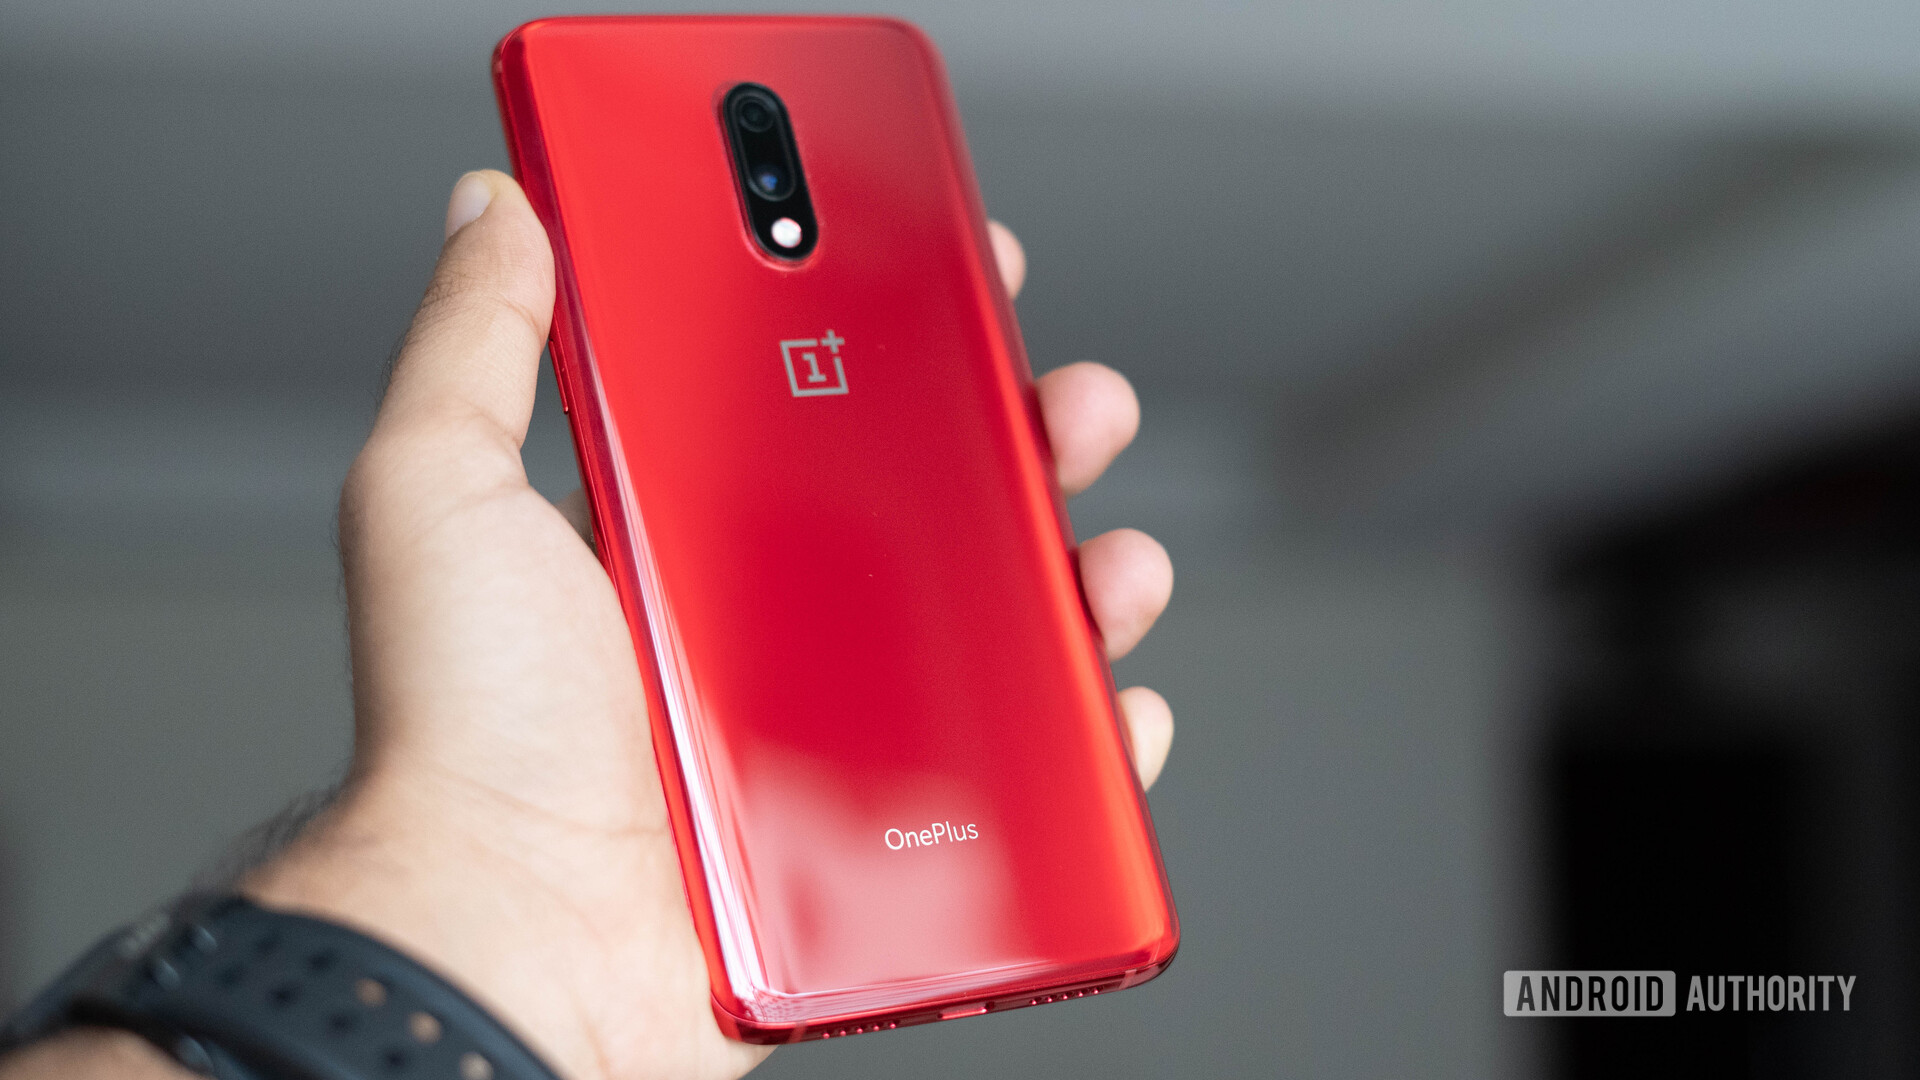 OnePlus 7 in red in a hand. OnePlus 7 versus OnePlus 6T.